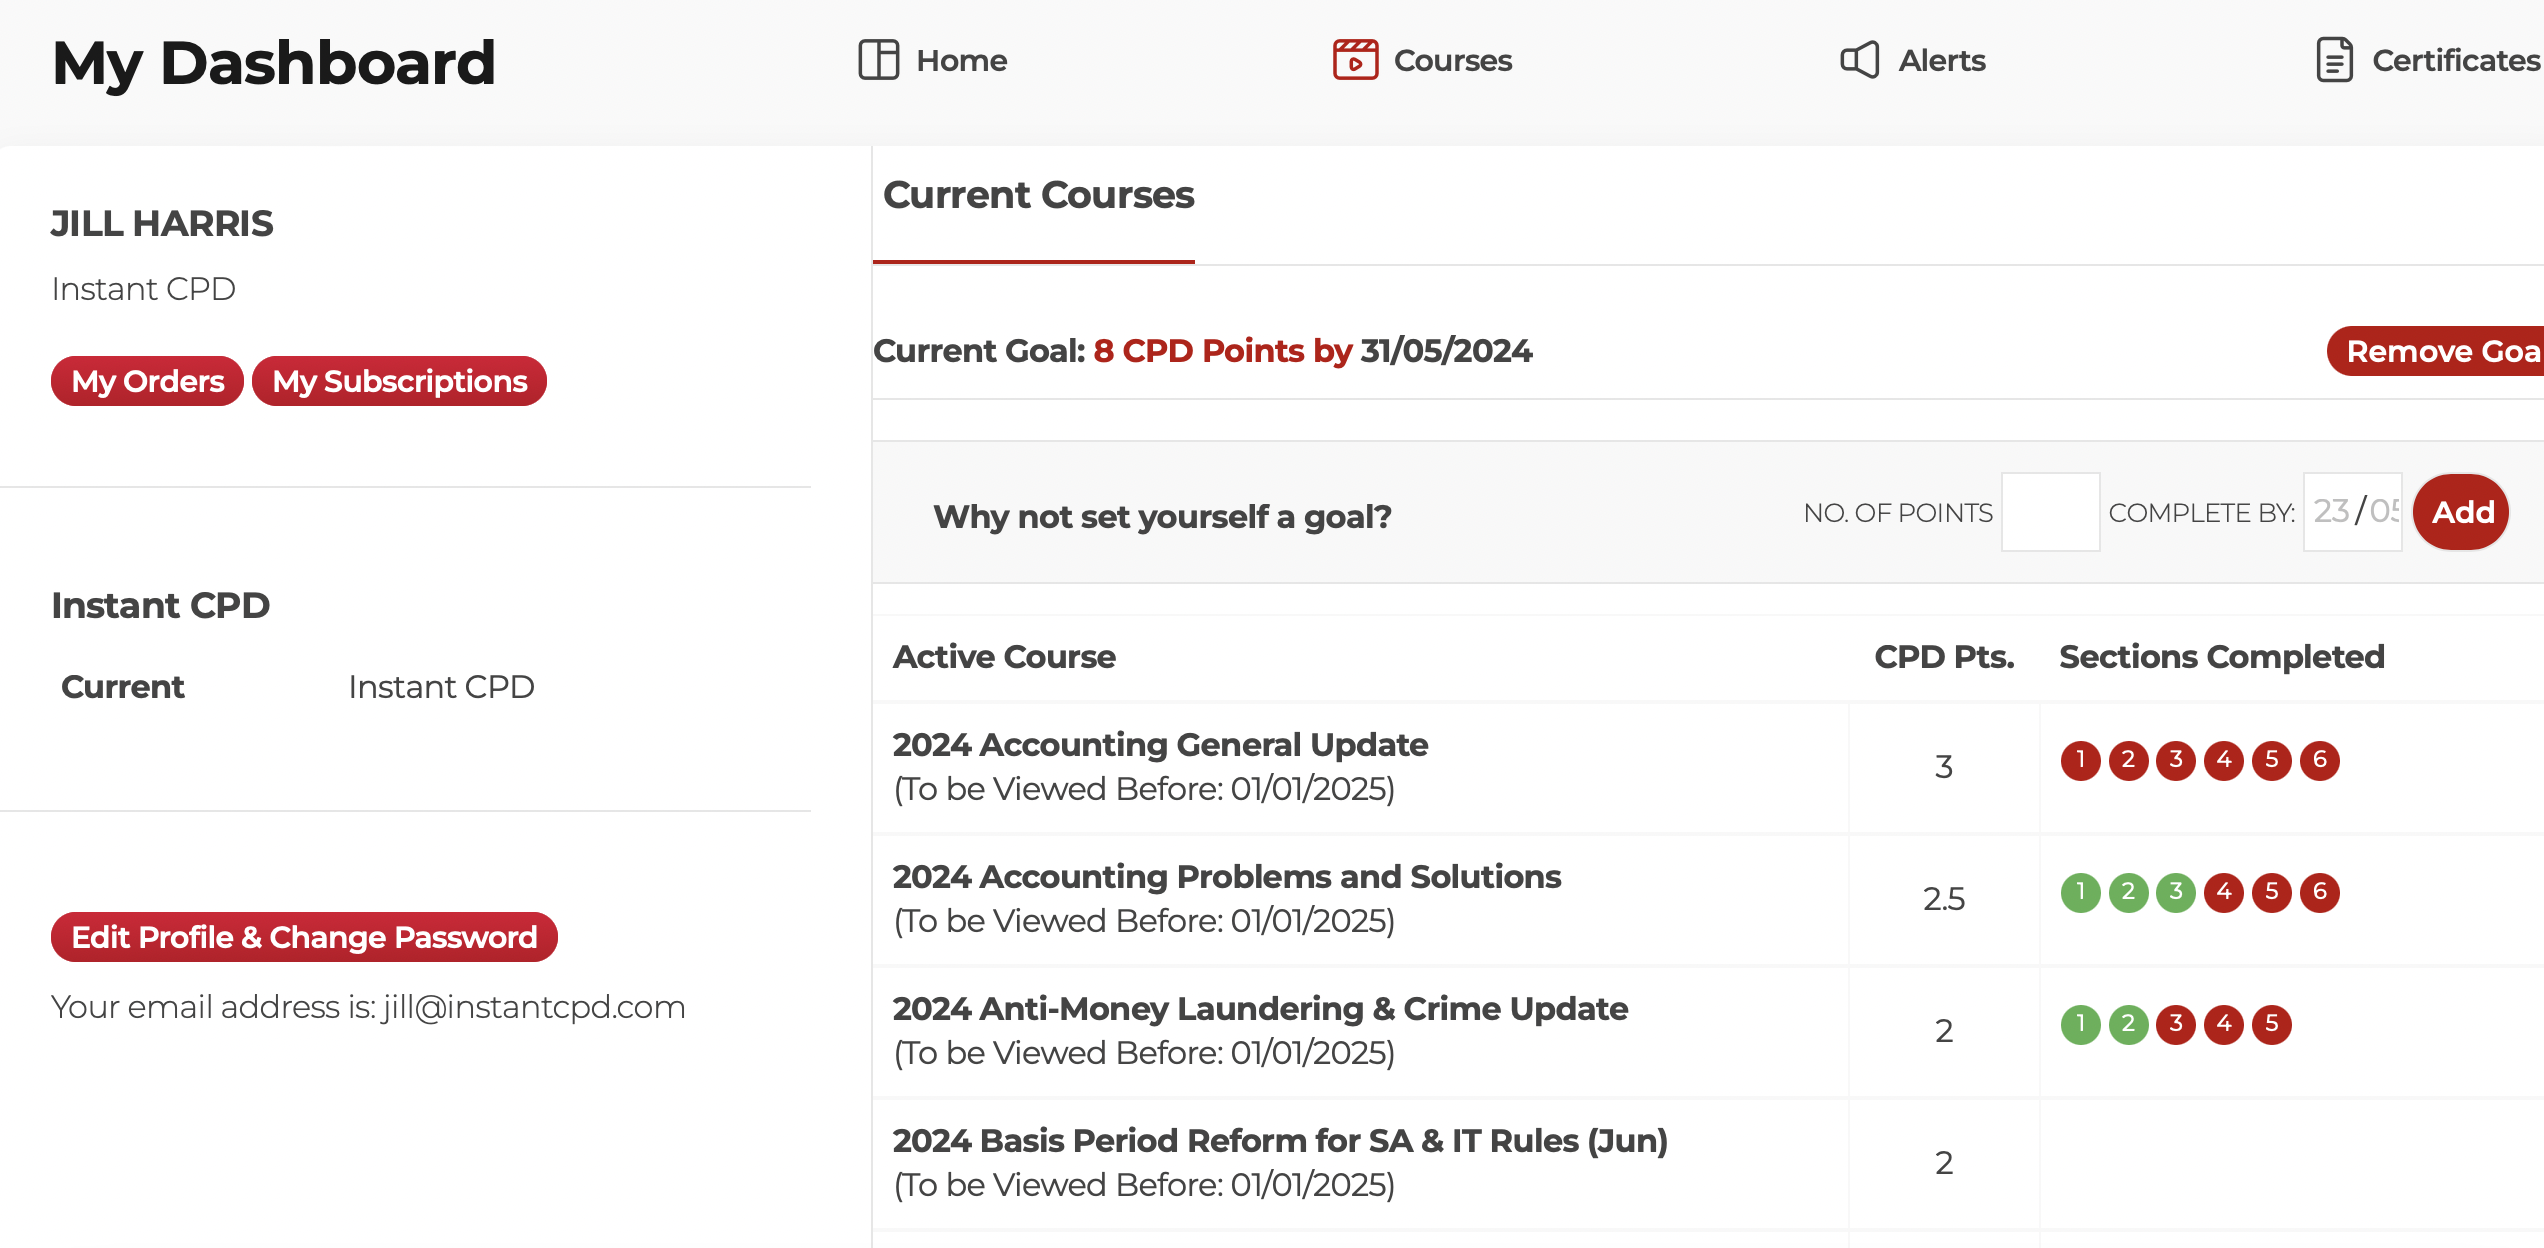 How to Access Your Courses